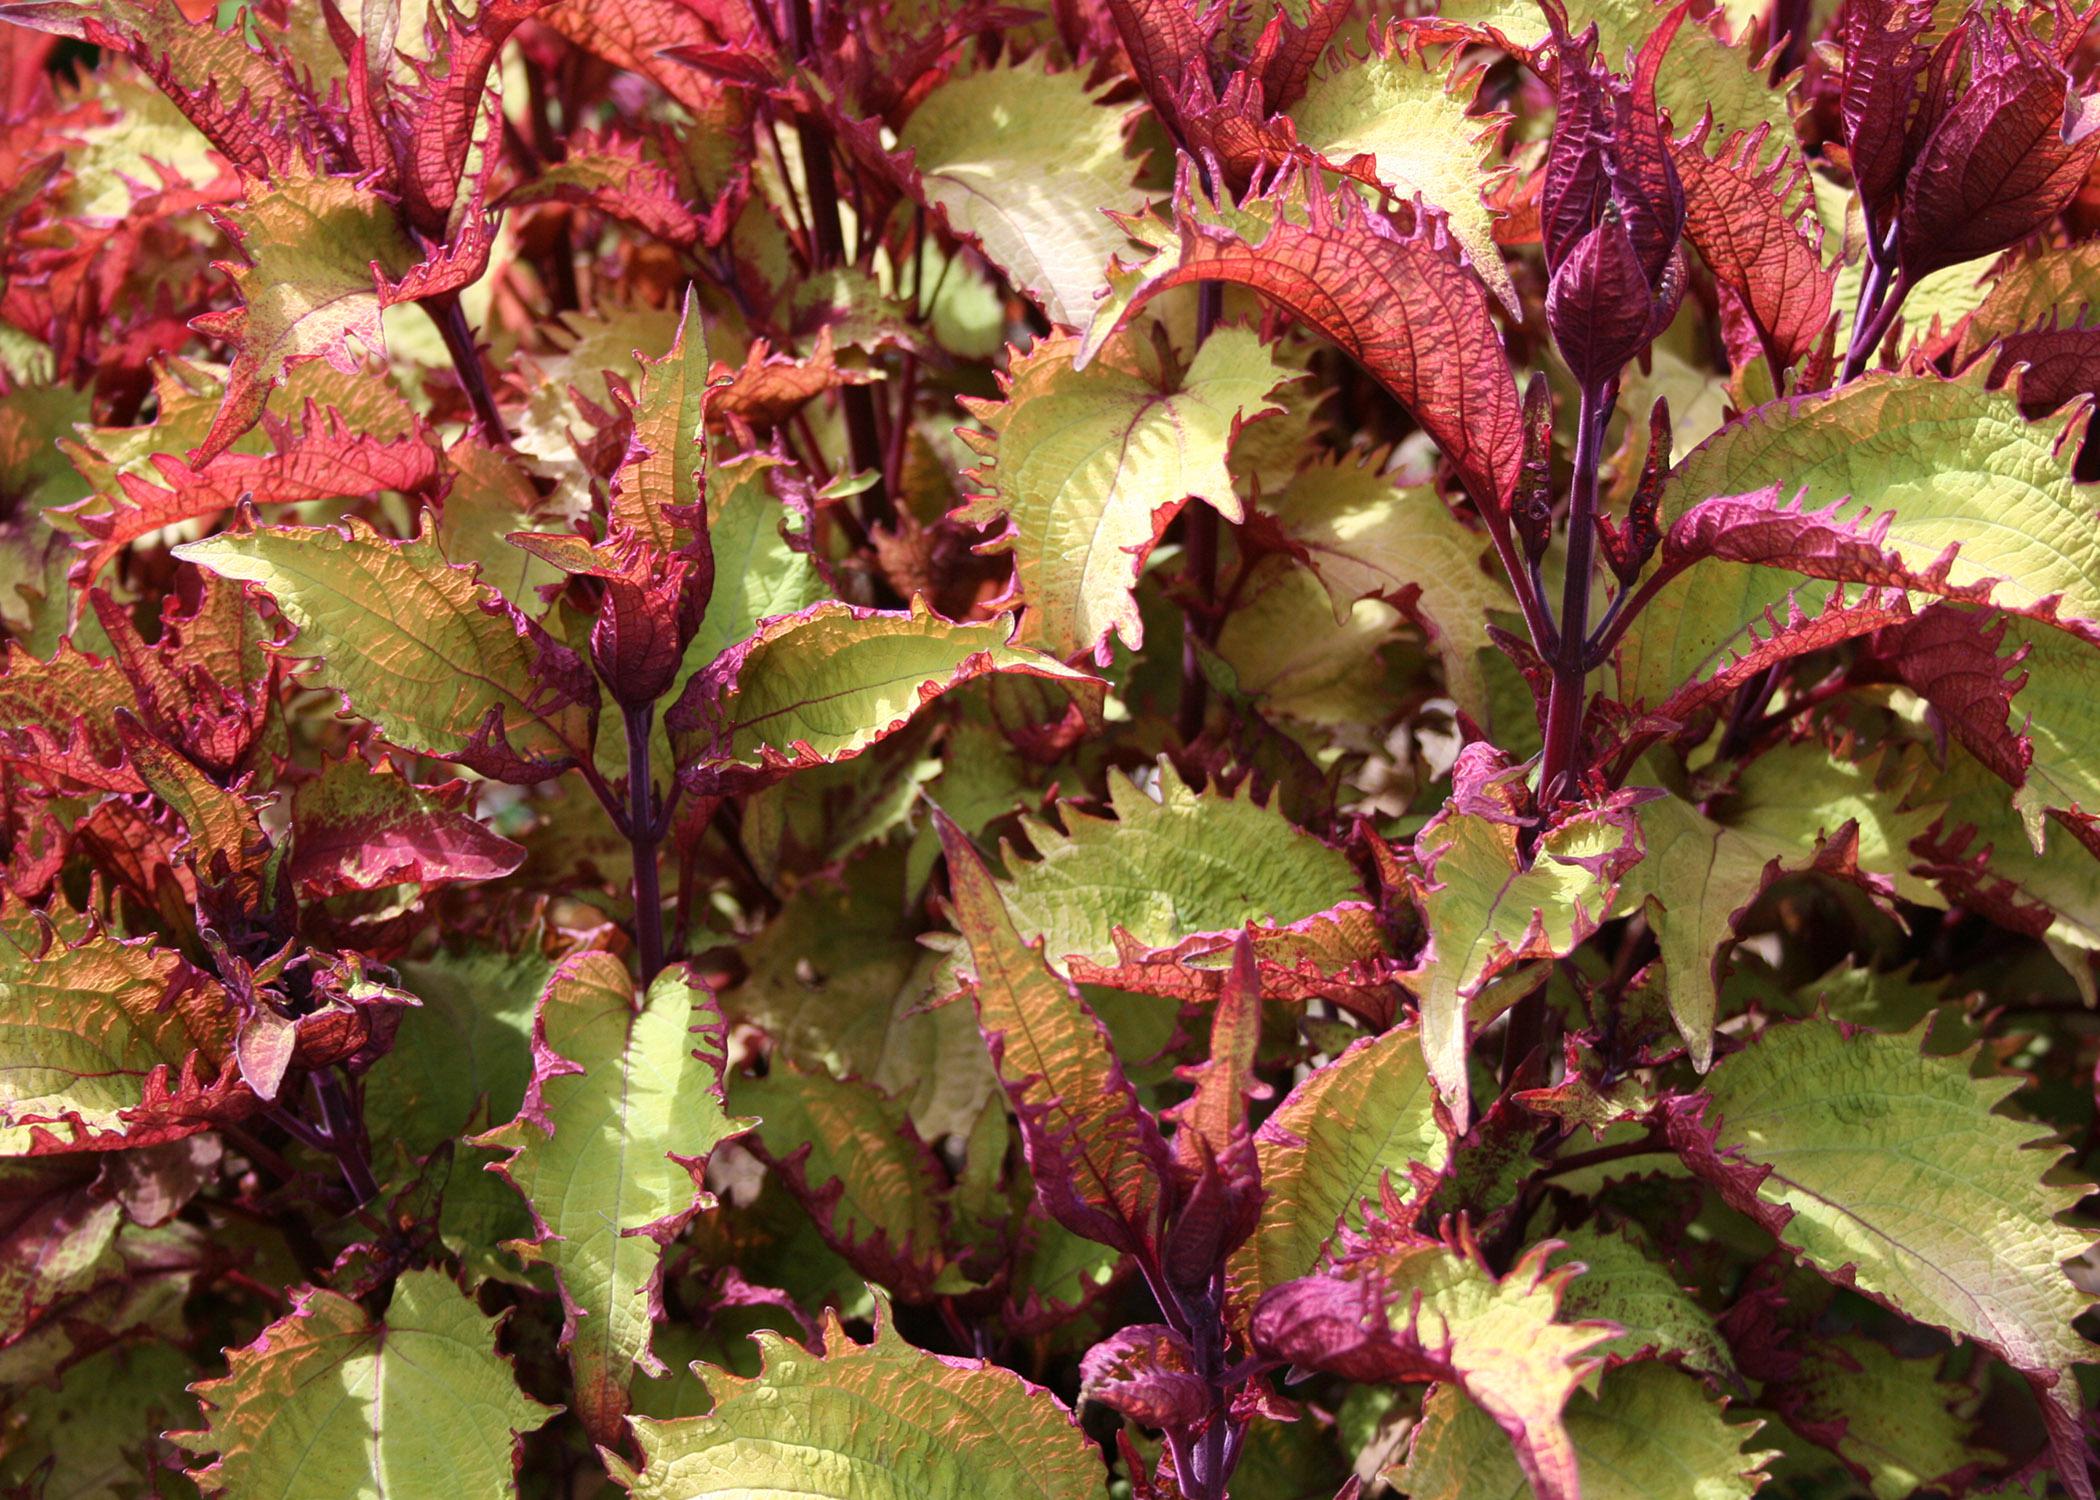 Sun coleus has moved from an obscure shade plant to a popular full sun plant that thrives in Mississippi summers. Plant breeders have developed rich and highly variegated sun coleus selections. (Photo by MSU Extension Service/Gary Bachman)